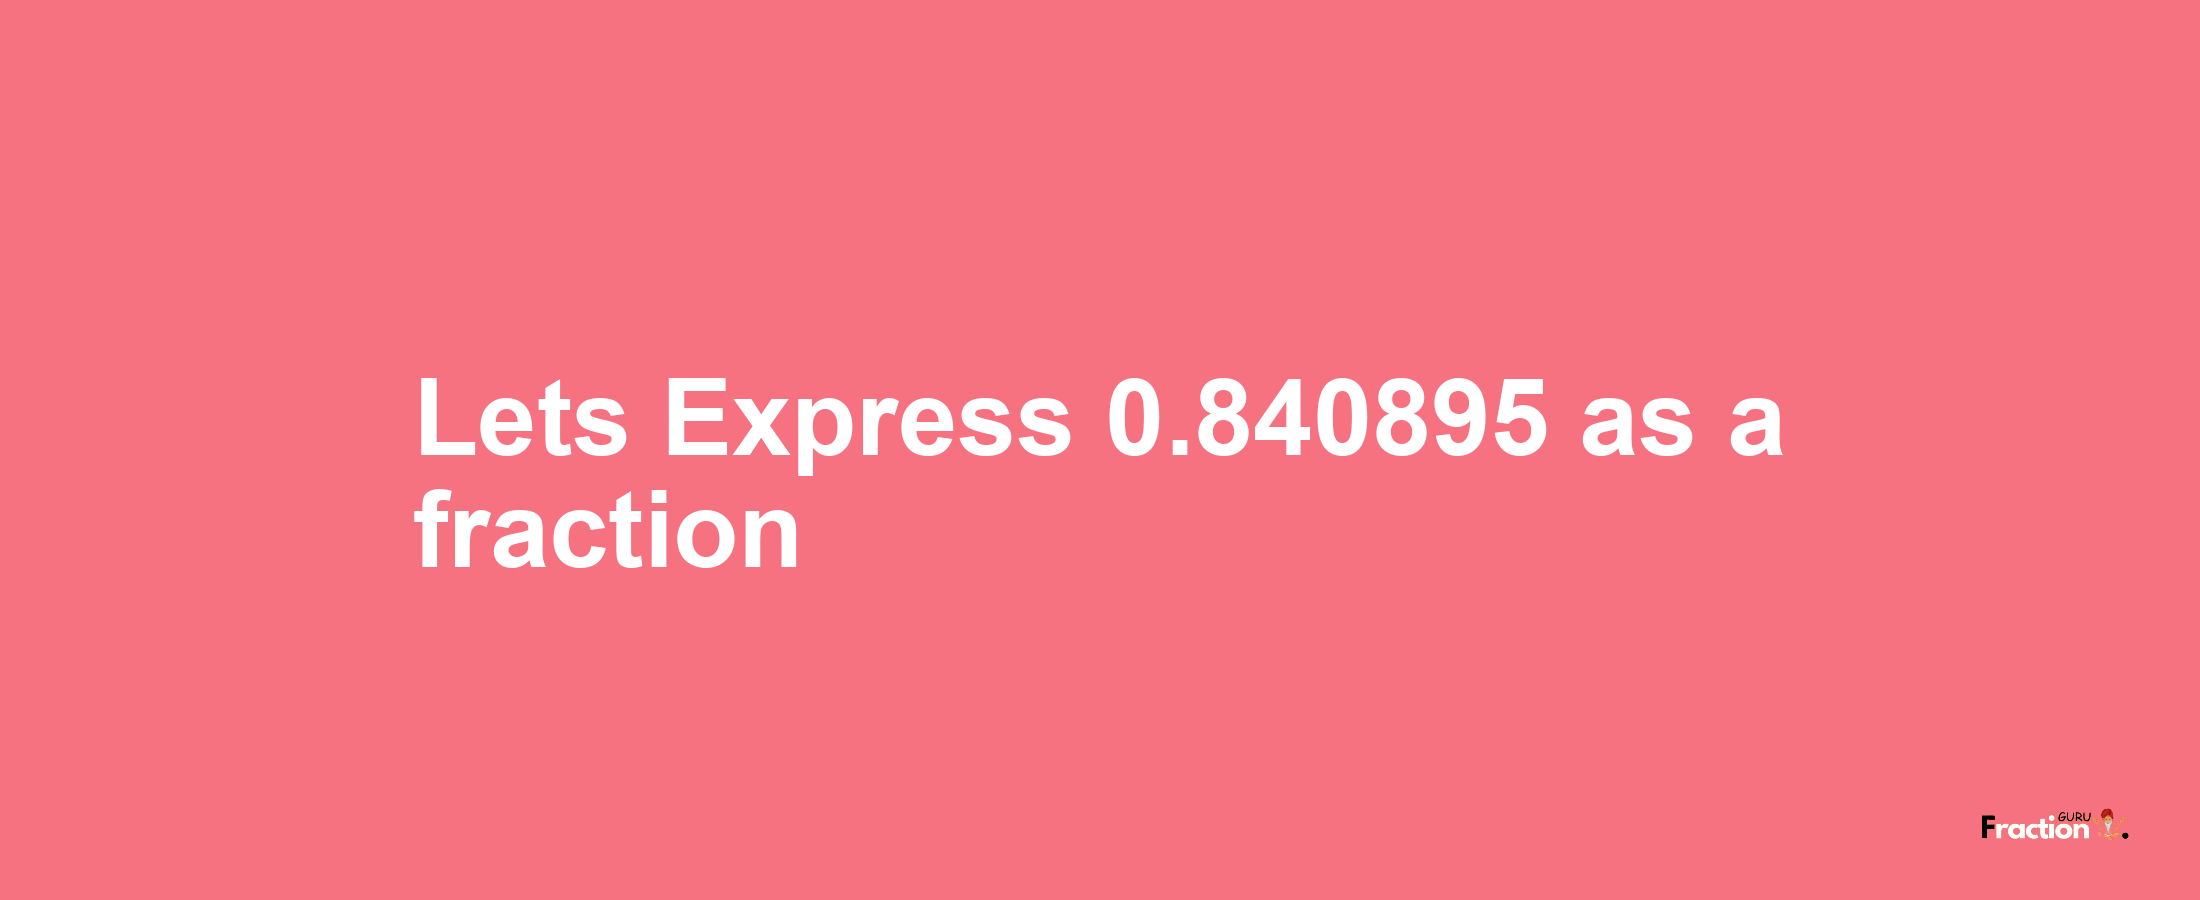 Lets Express 0.840895 as afraction